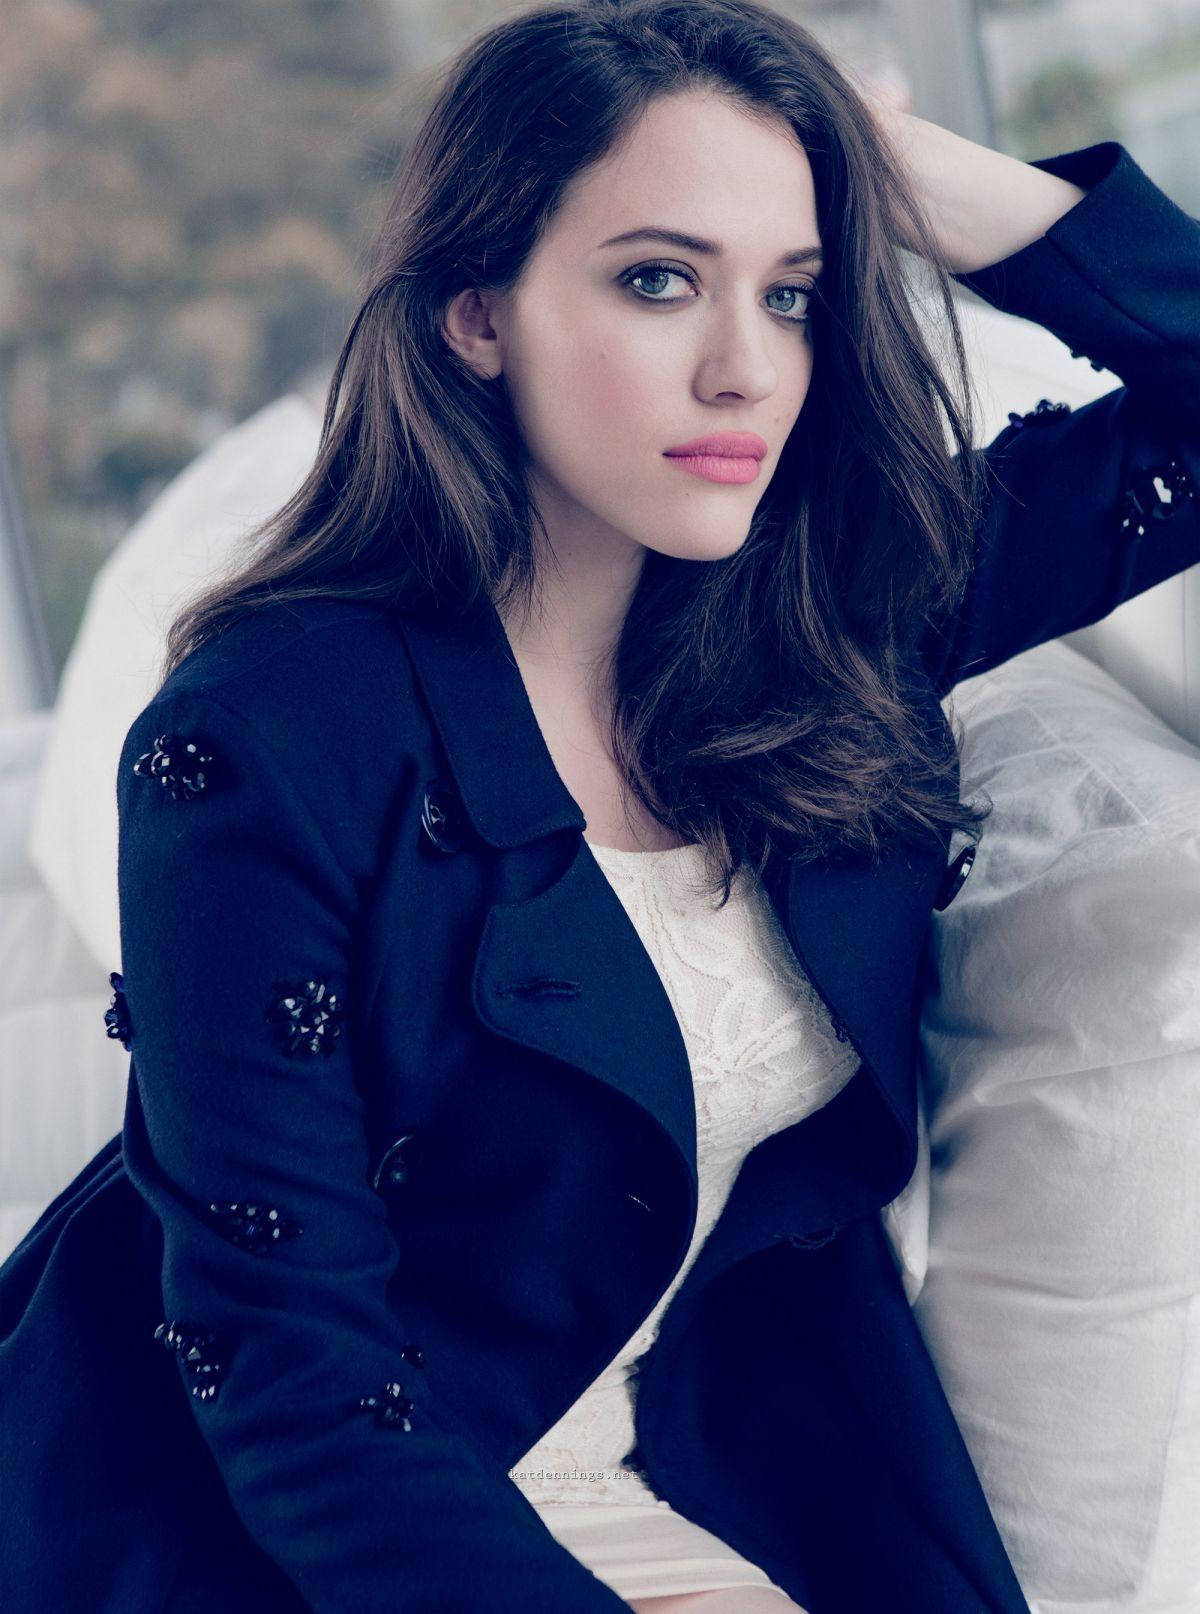 Kat Dennings Leaning On Couch 2014 Photoshoot Wallpaper